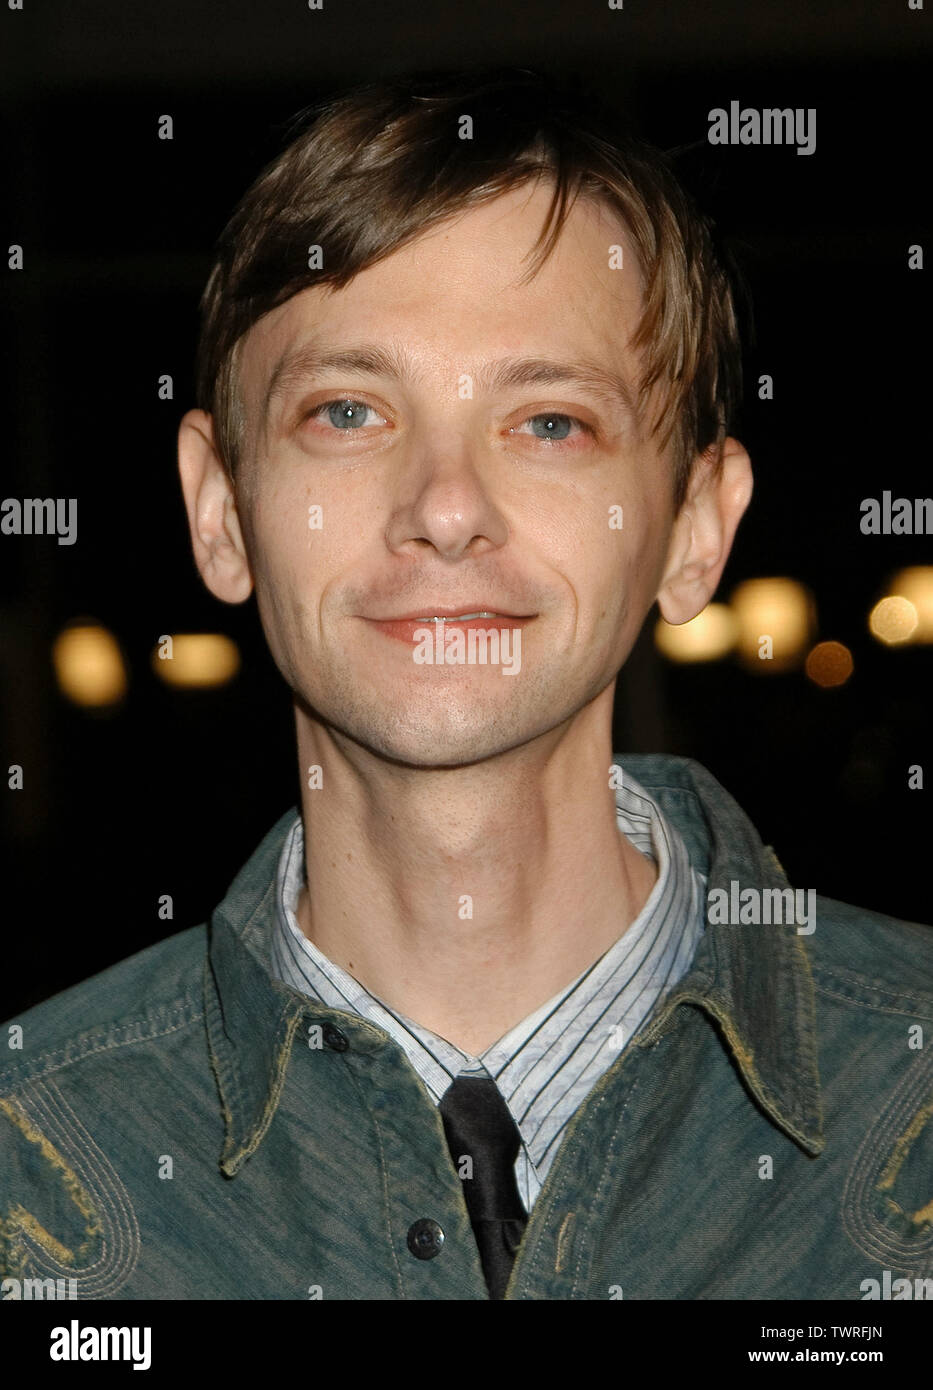 https://c8.alamy.com/comp/TWRFJN/dj-qualls-at-the-world-premiere-of-paramounts-paycheck-at-manns-chinese-theatre-in-hollywood-ca-the-event-took-place-on-thursday-december-18-2003-photo-credit-sbm-picturelux-file-reference-33790-2836smbplx-for-editorial-use-only-all-rights-reserved-TWRFJN.jpg